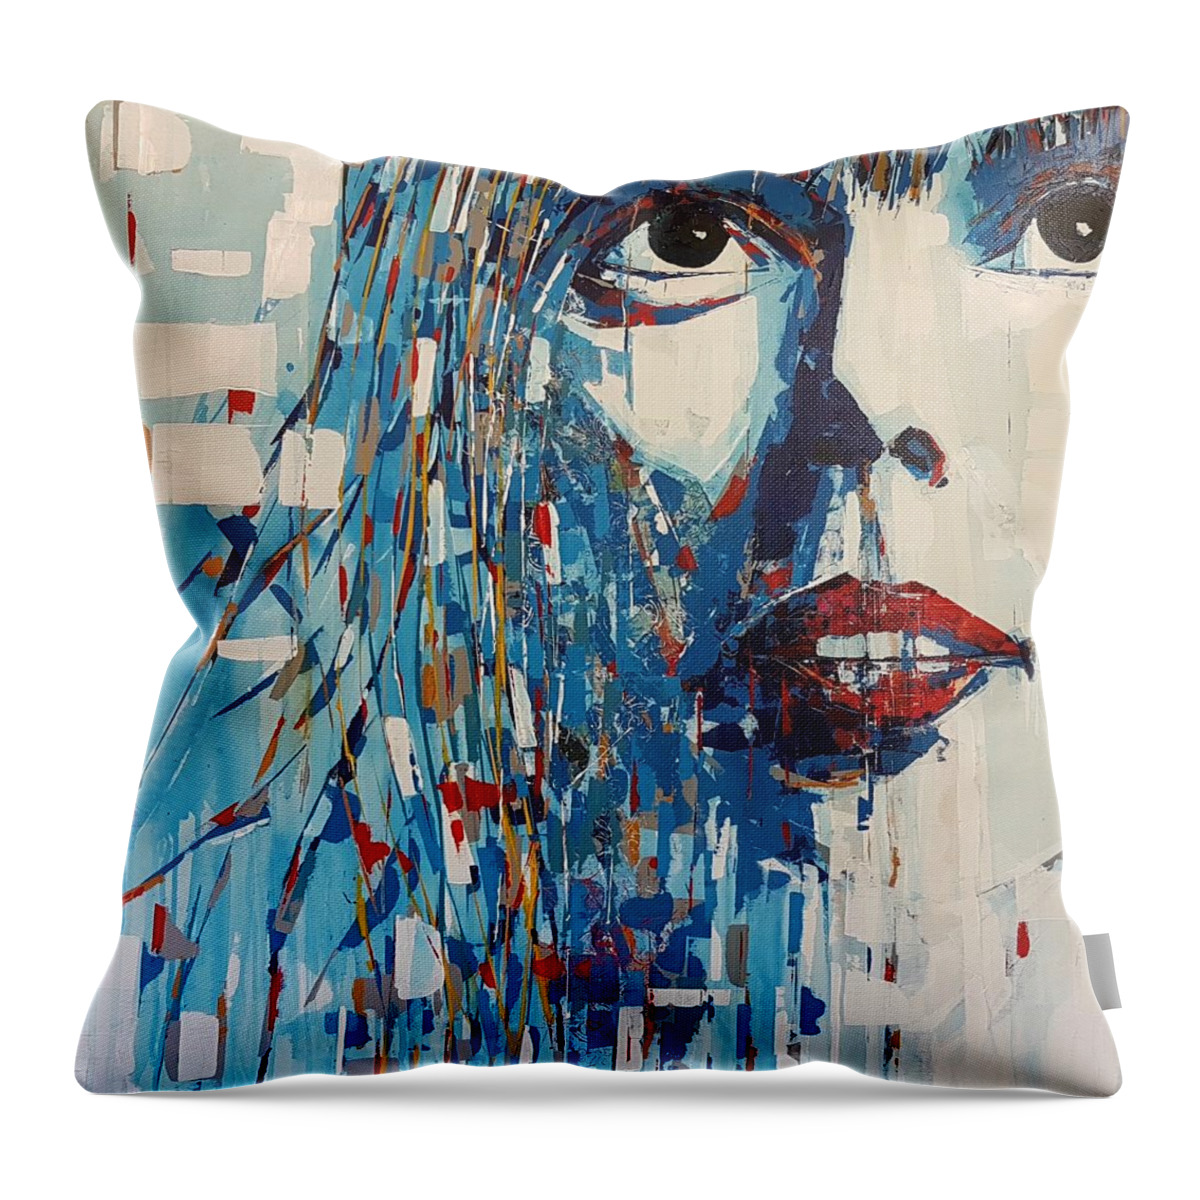 Joni Mitchell Art Throw Pillow featuring the painting Joni Mitchell All I Want by Paul Lovering